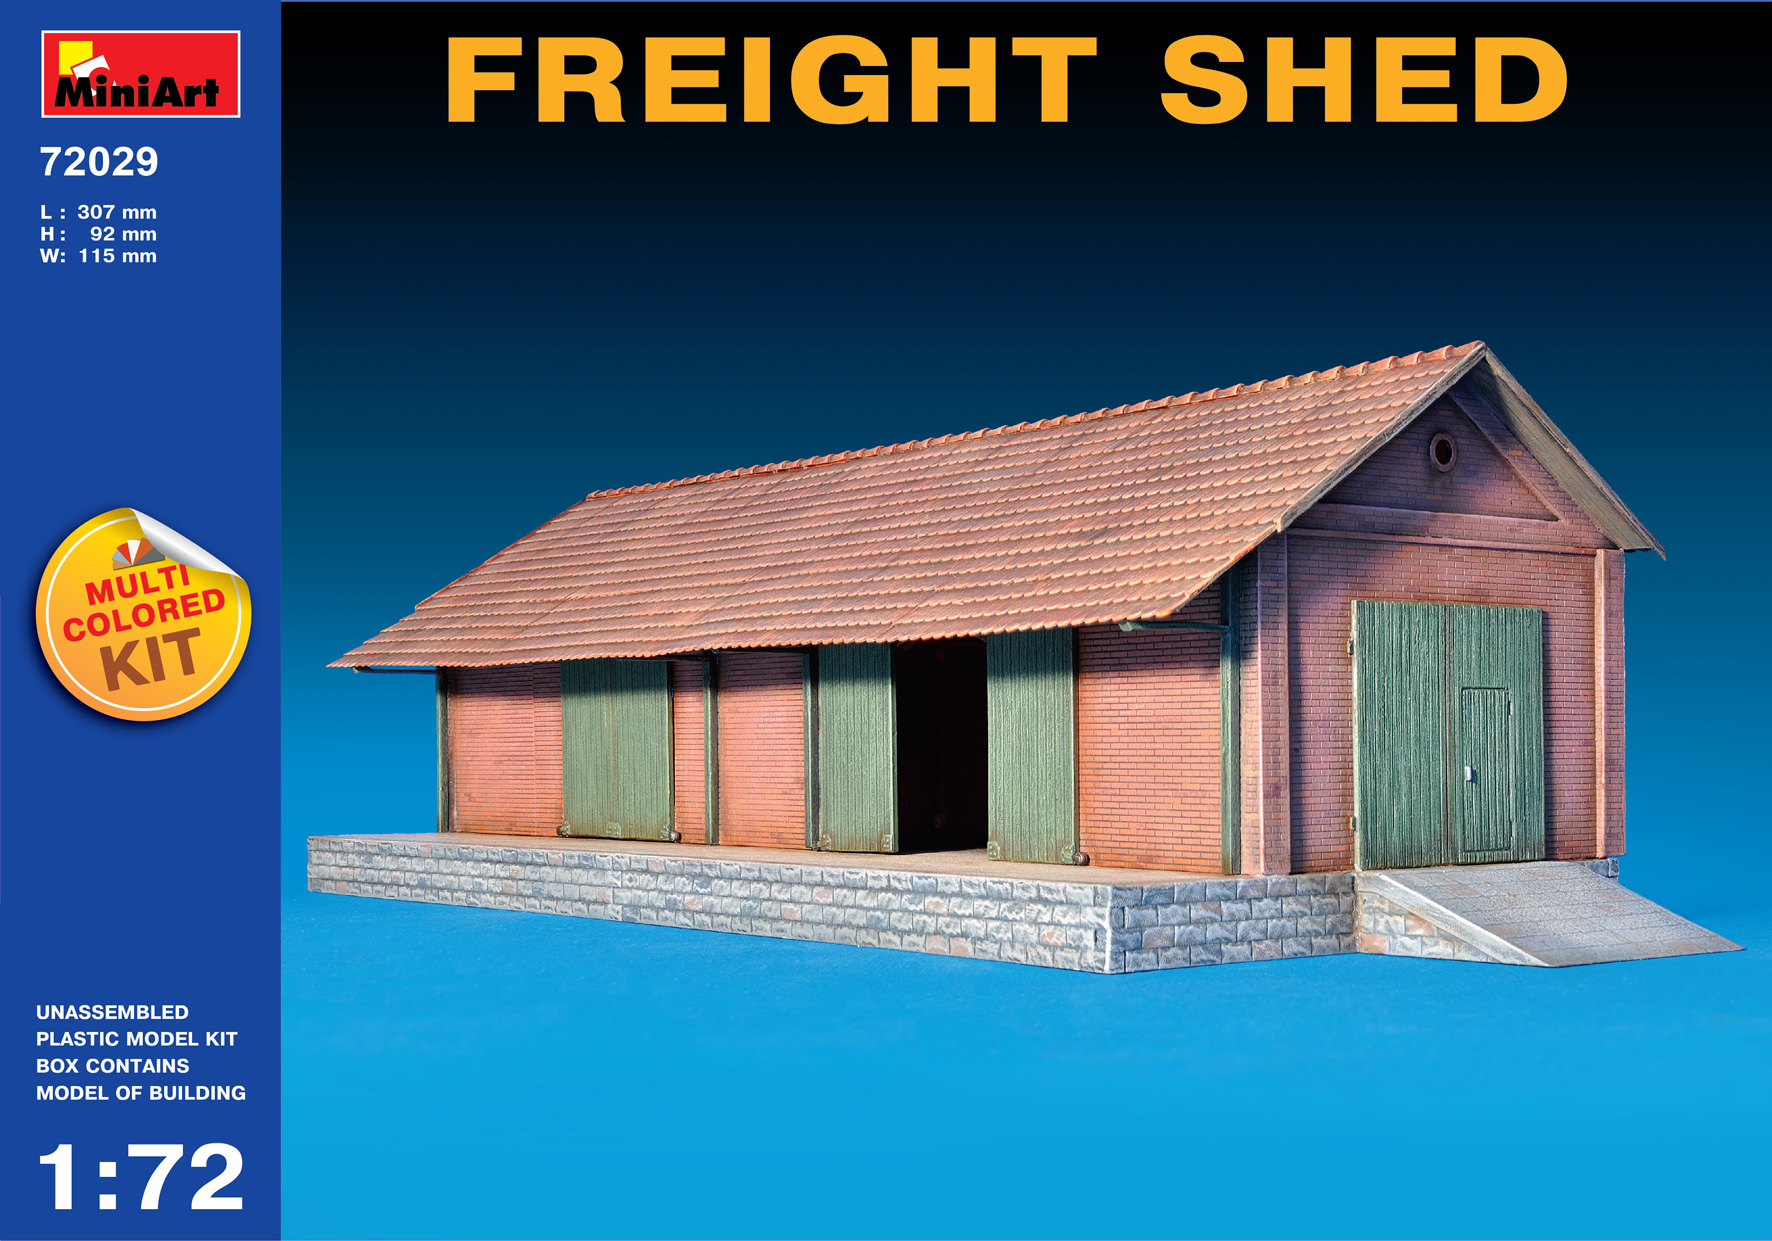 Freight Shed multi Coloured Kit Miniart 1:72 